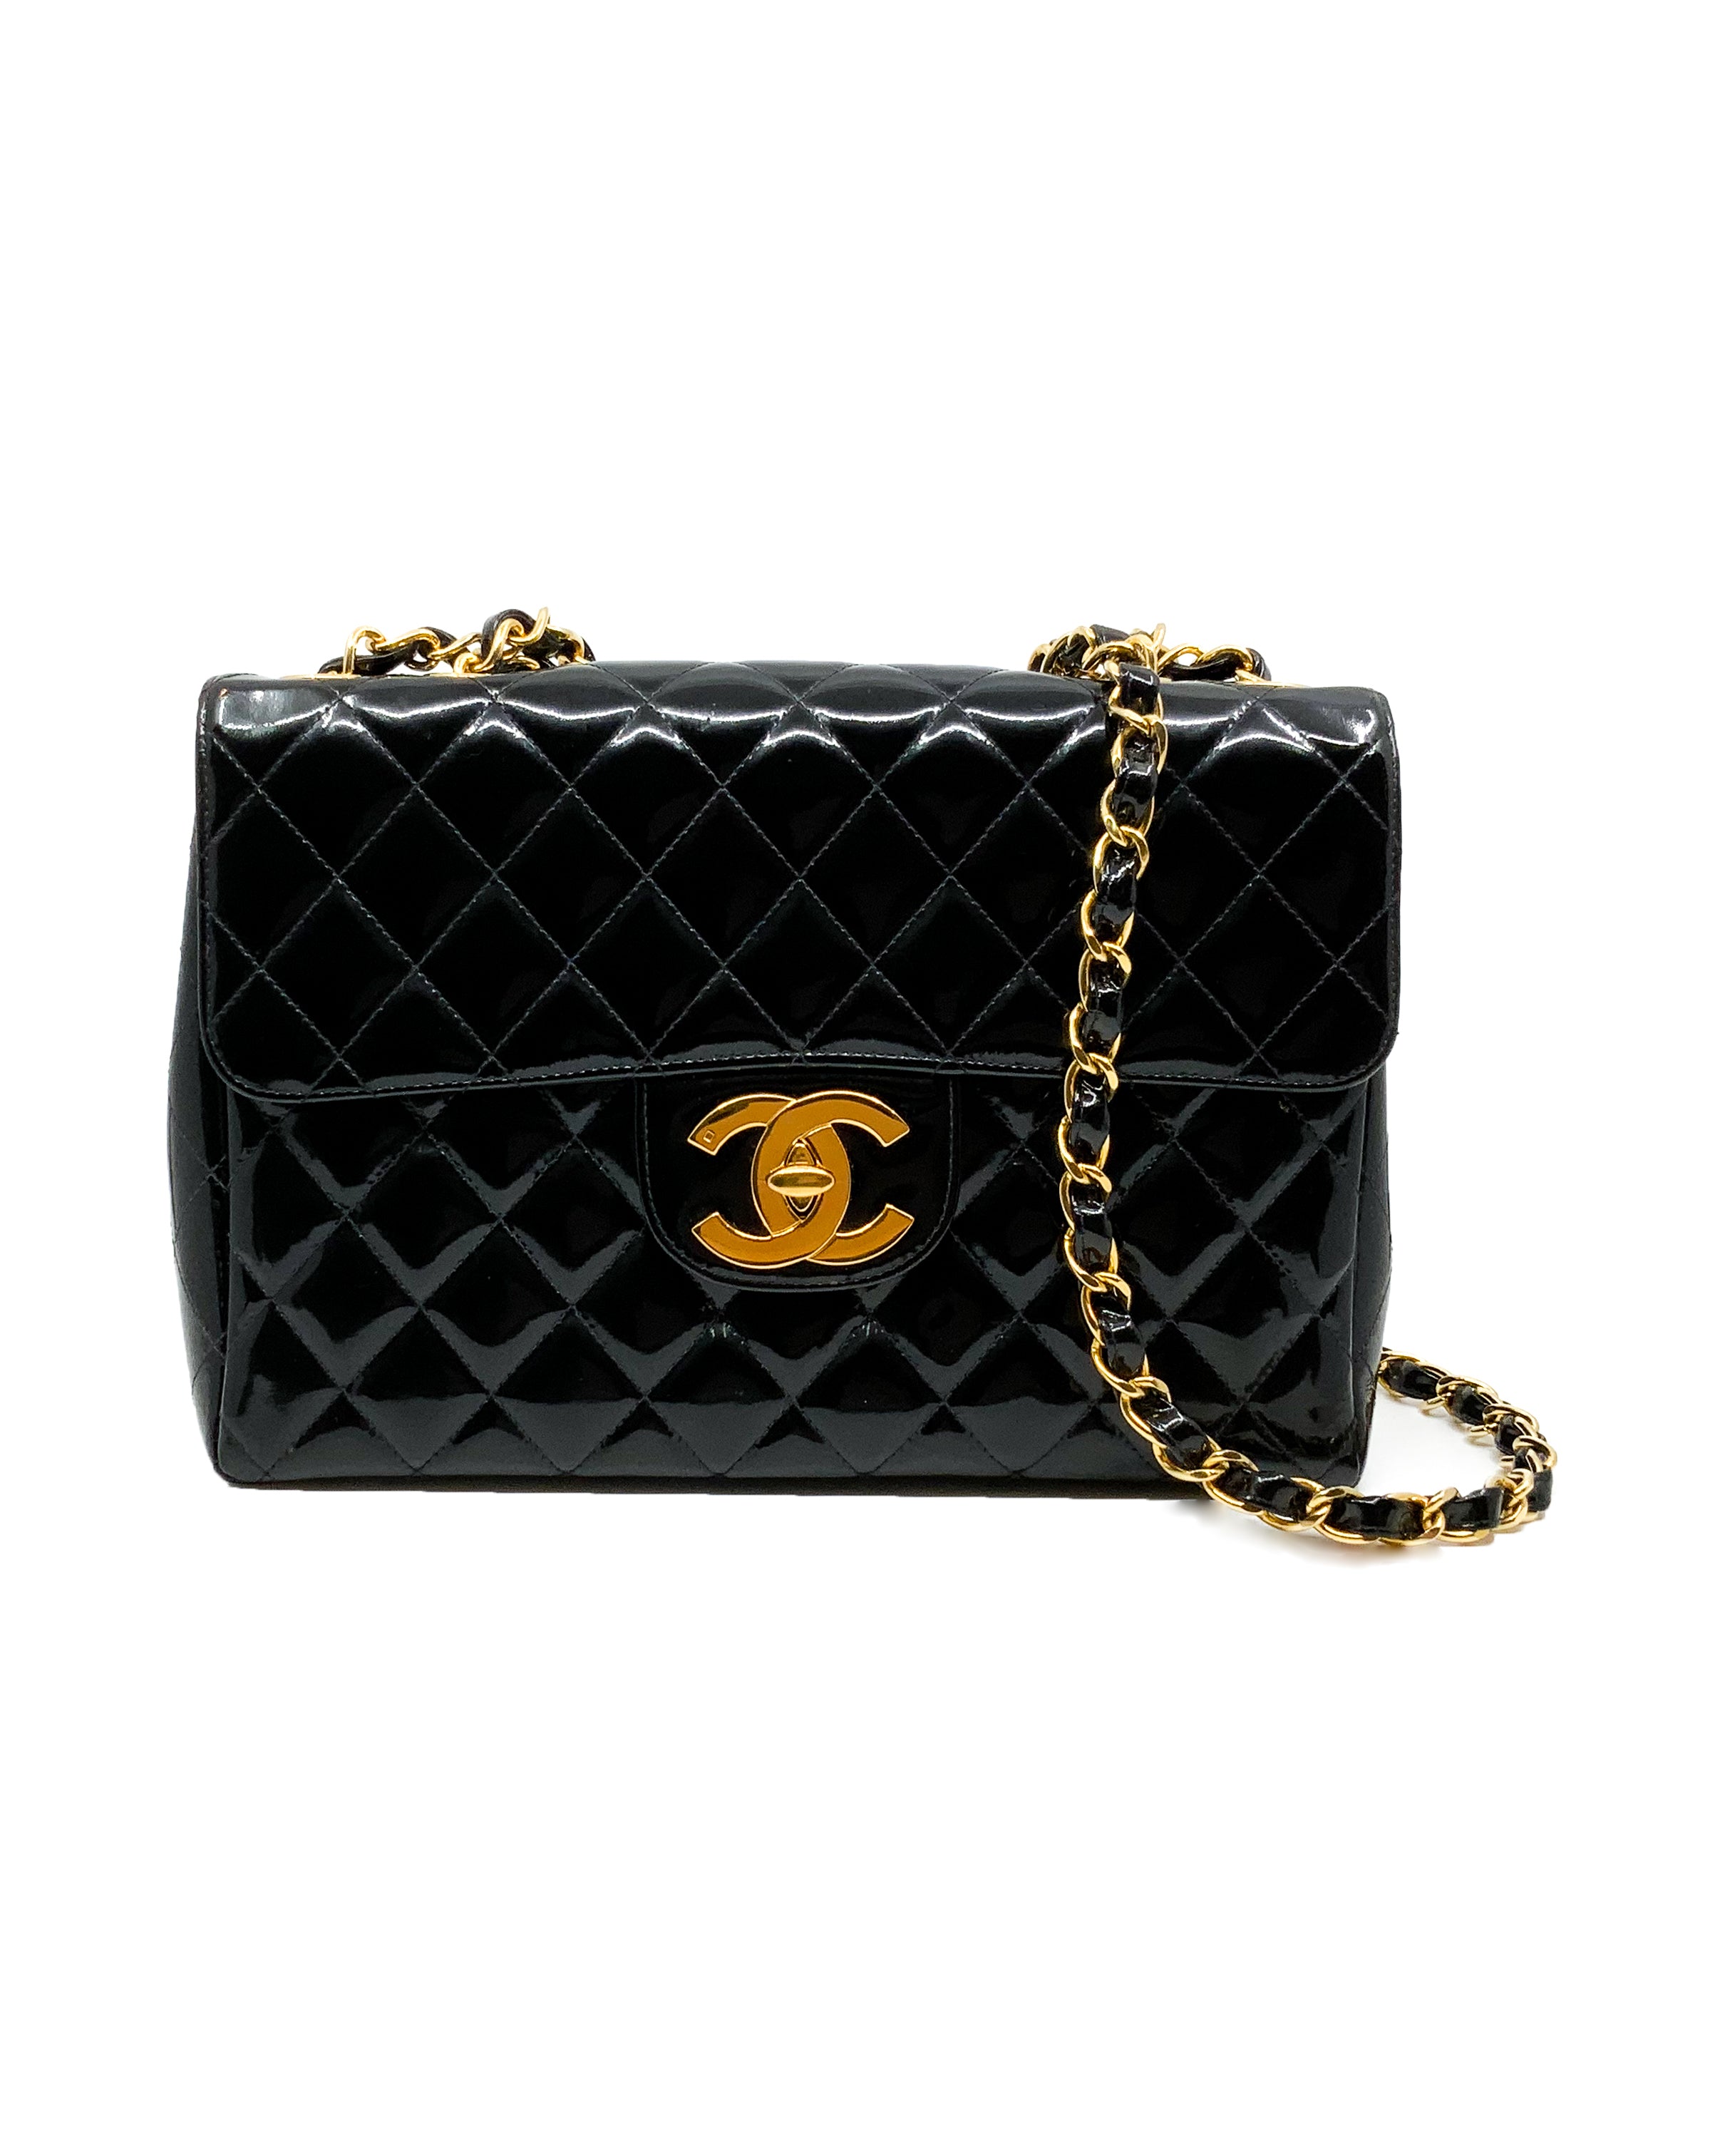 CHANEL Vintage 1997 Quilted Crossbody Flap Bag